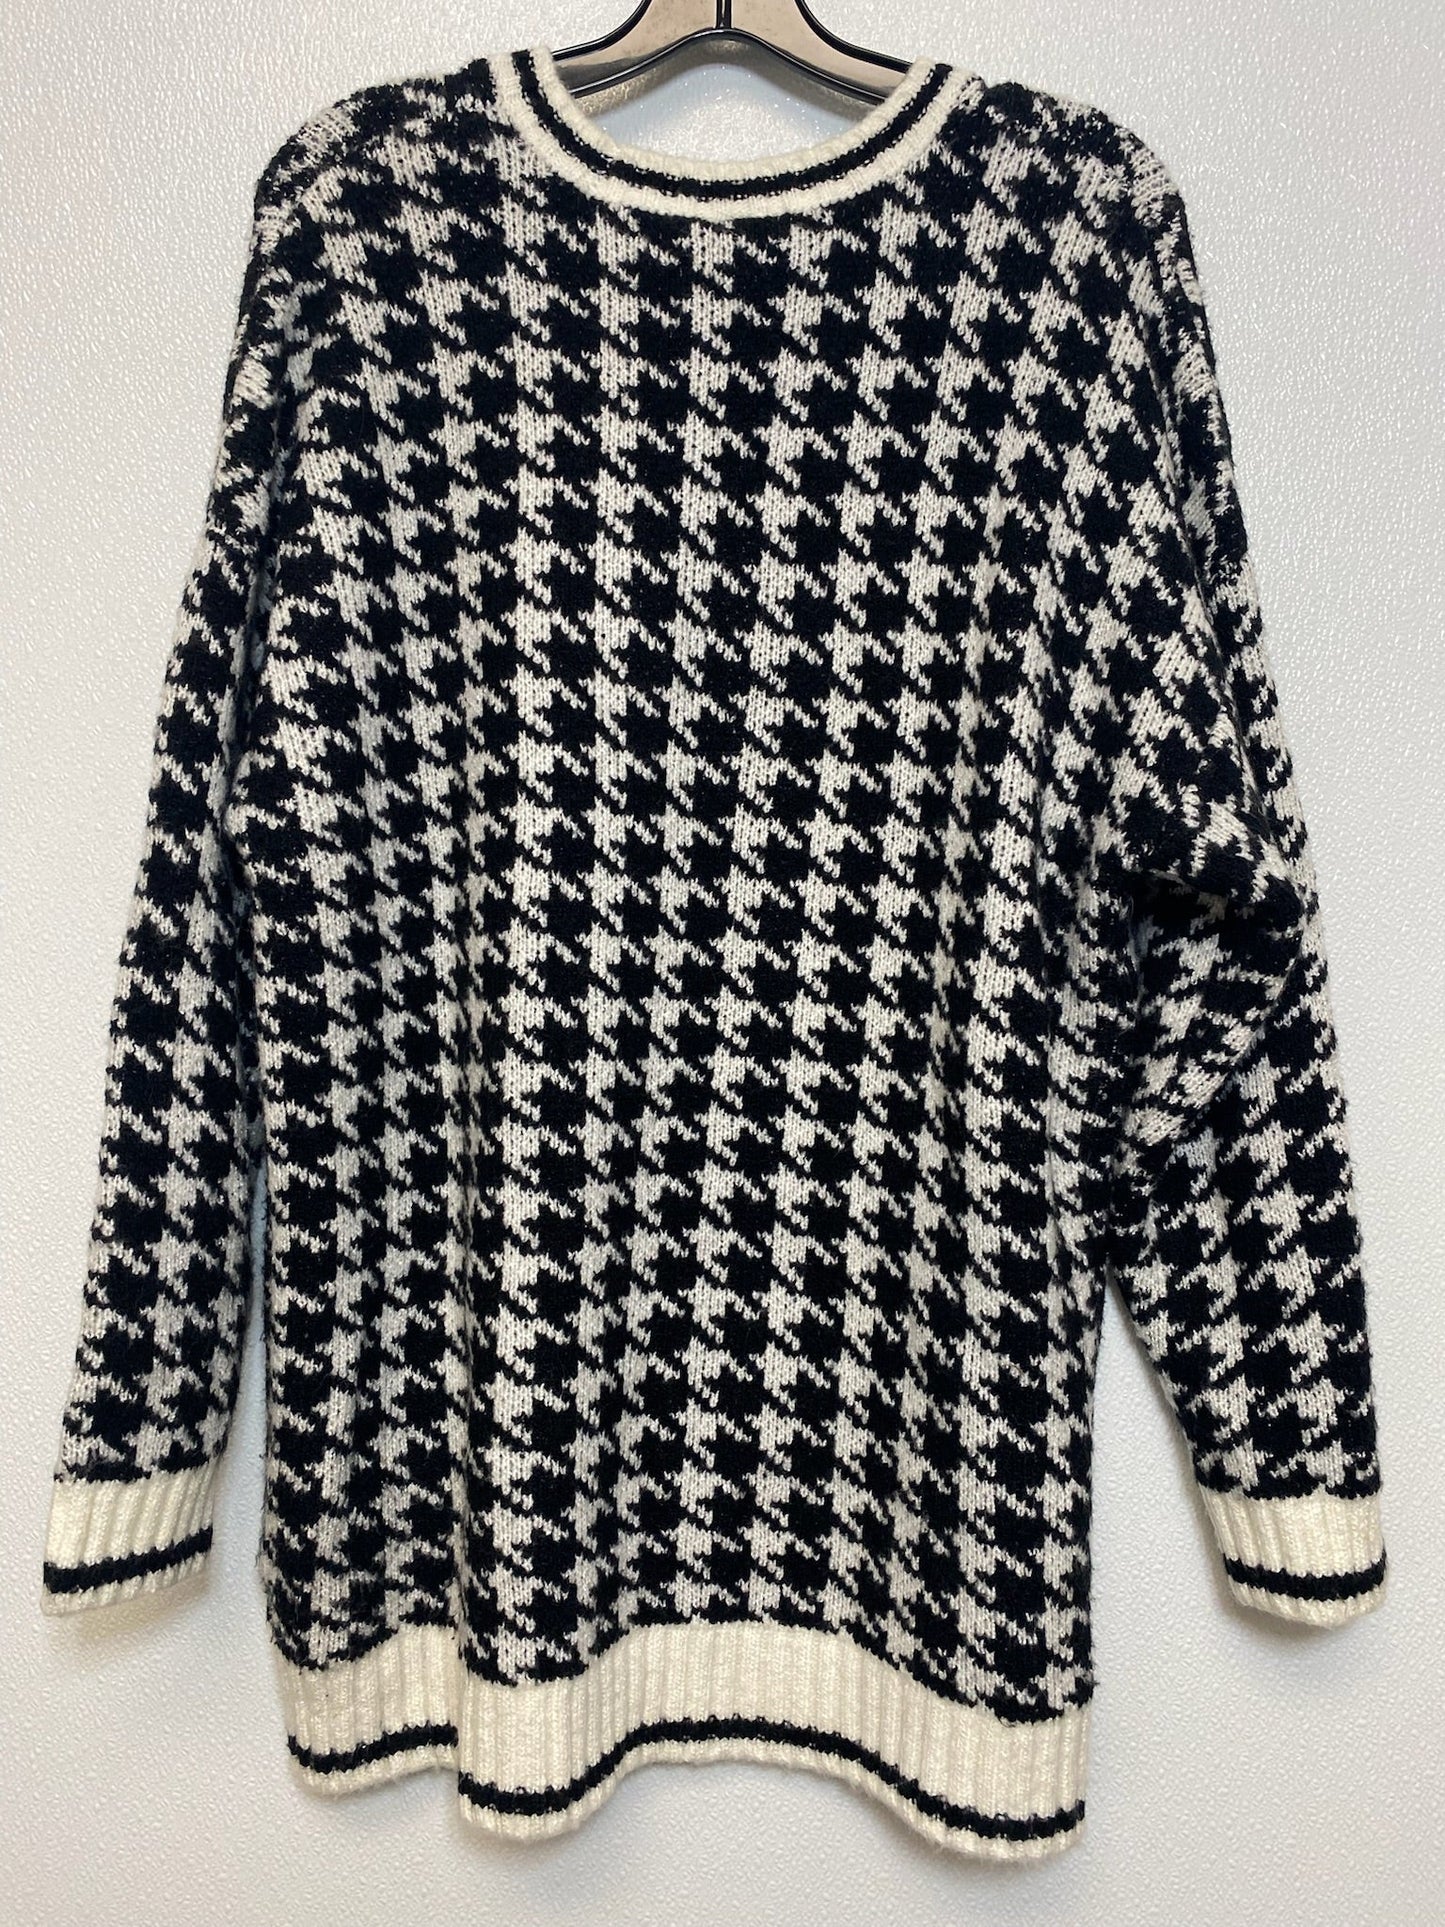 Sweater By Torrid  Size: 2x